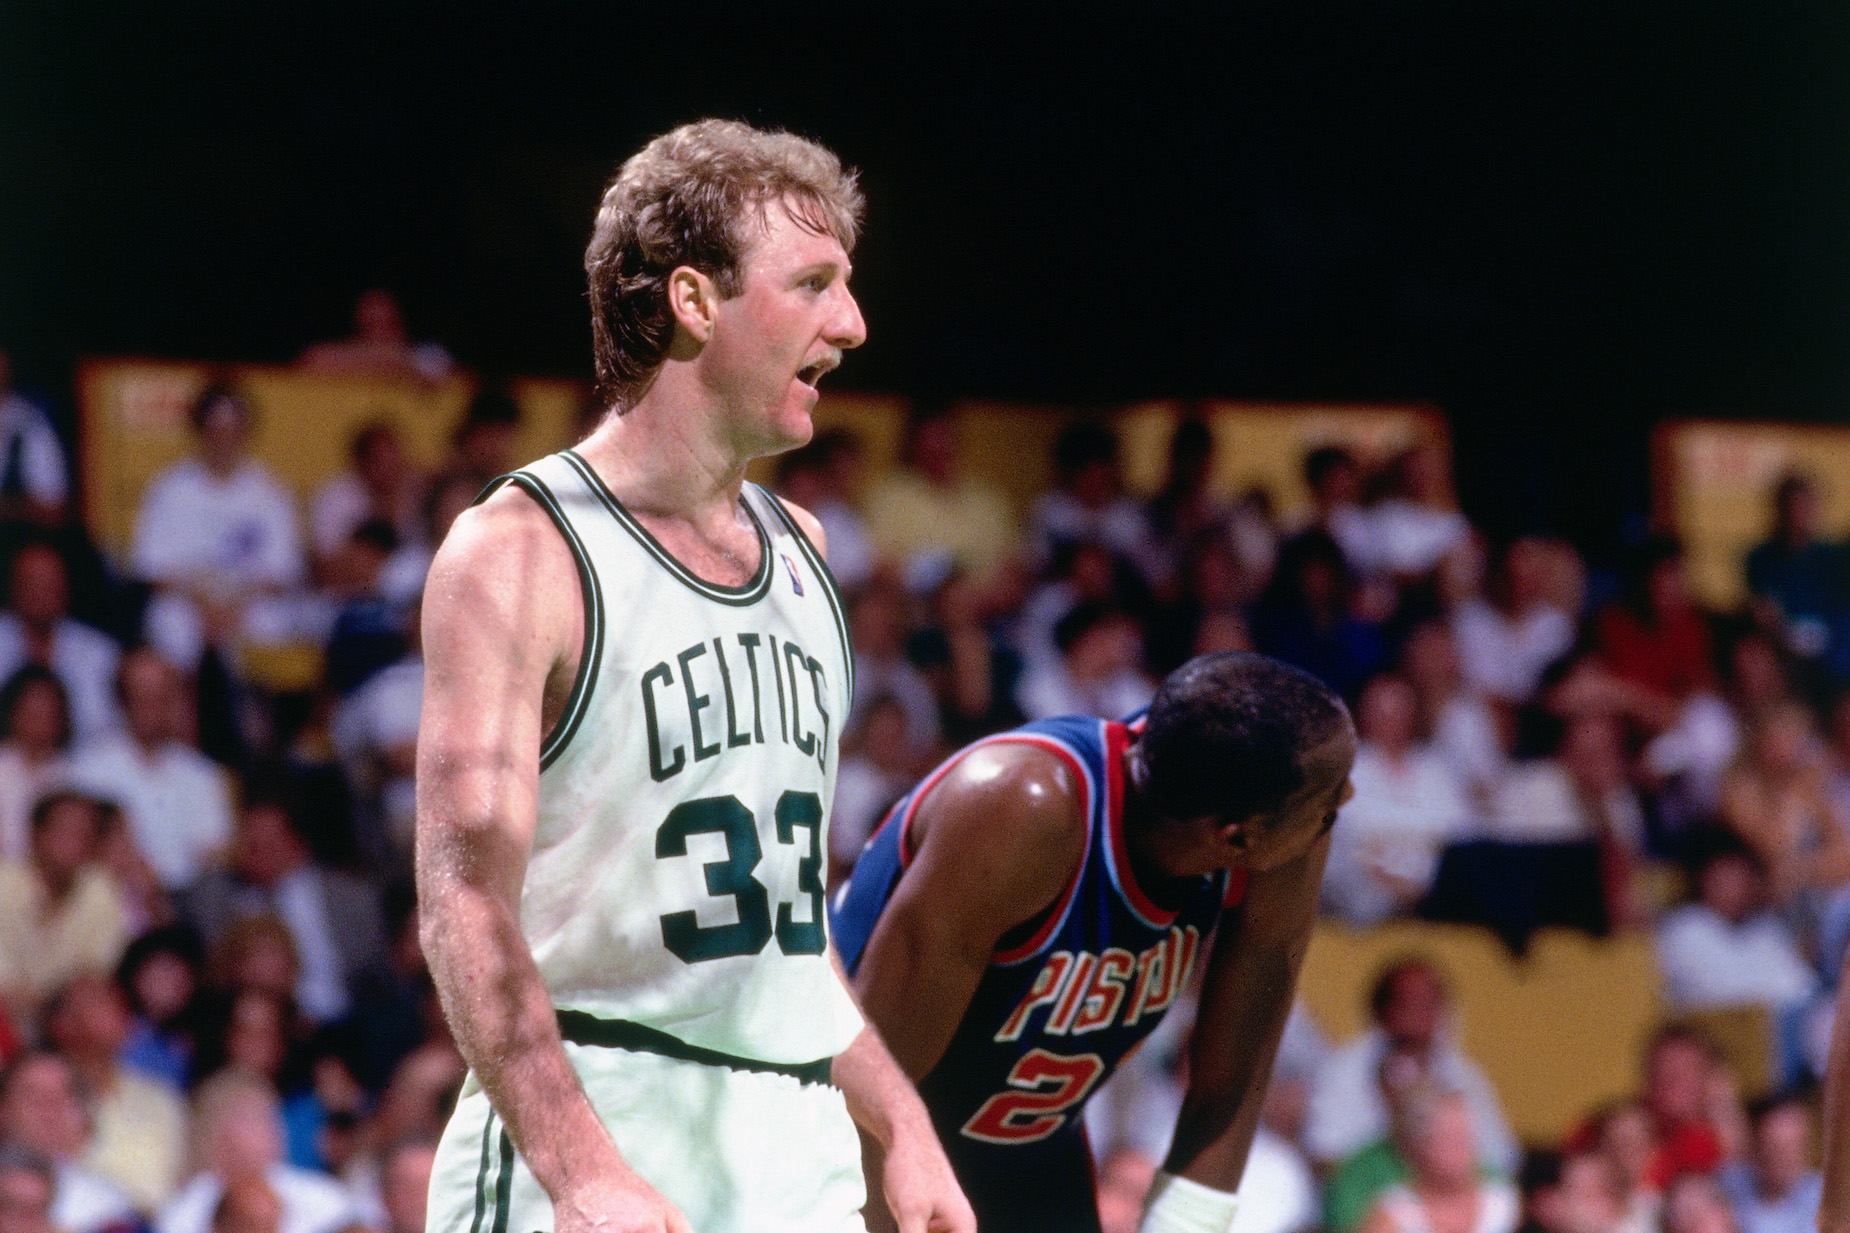 Larry Bird played in the rough and tumble 1980s, but appreciates the modern game's rulebook.